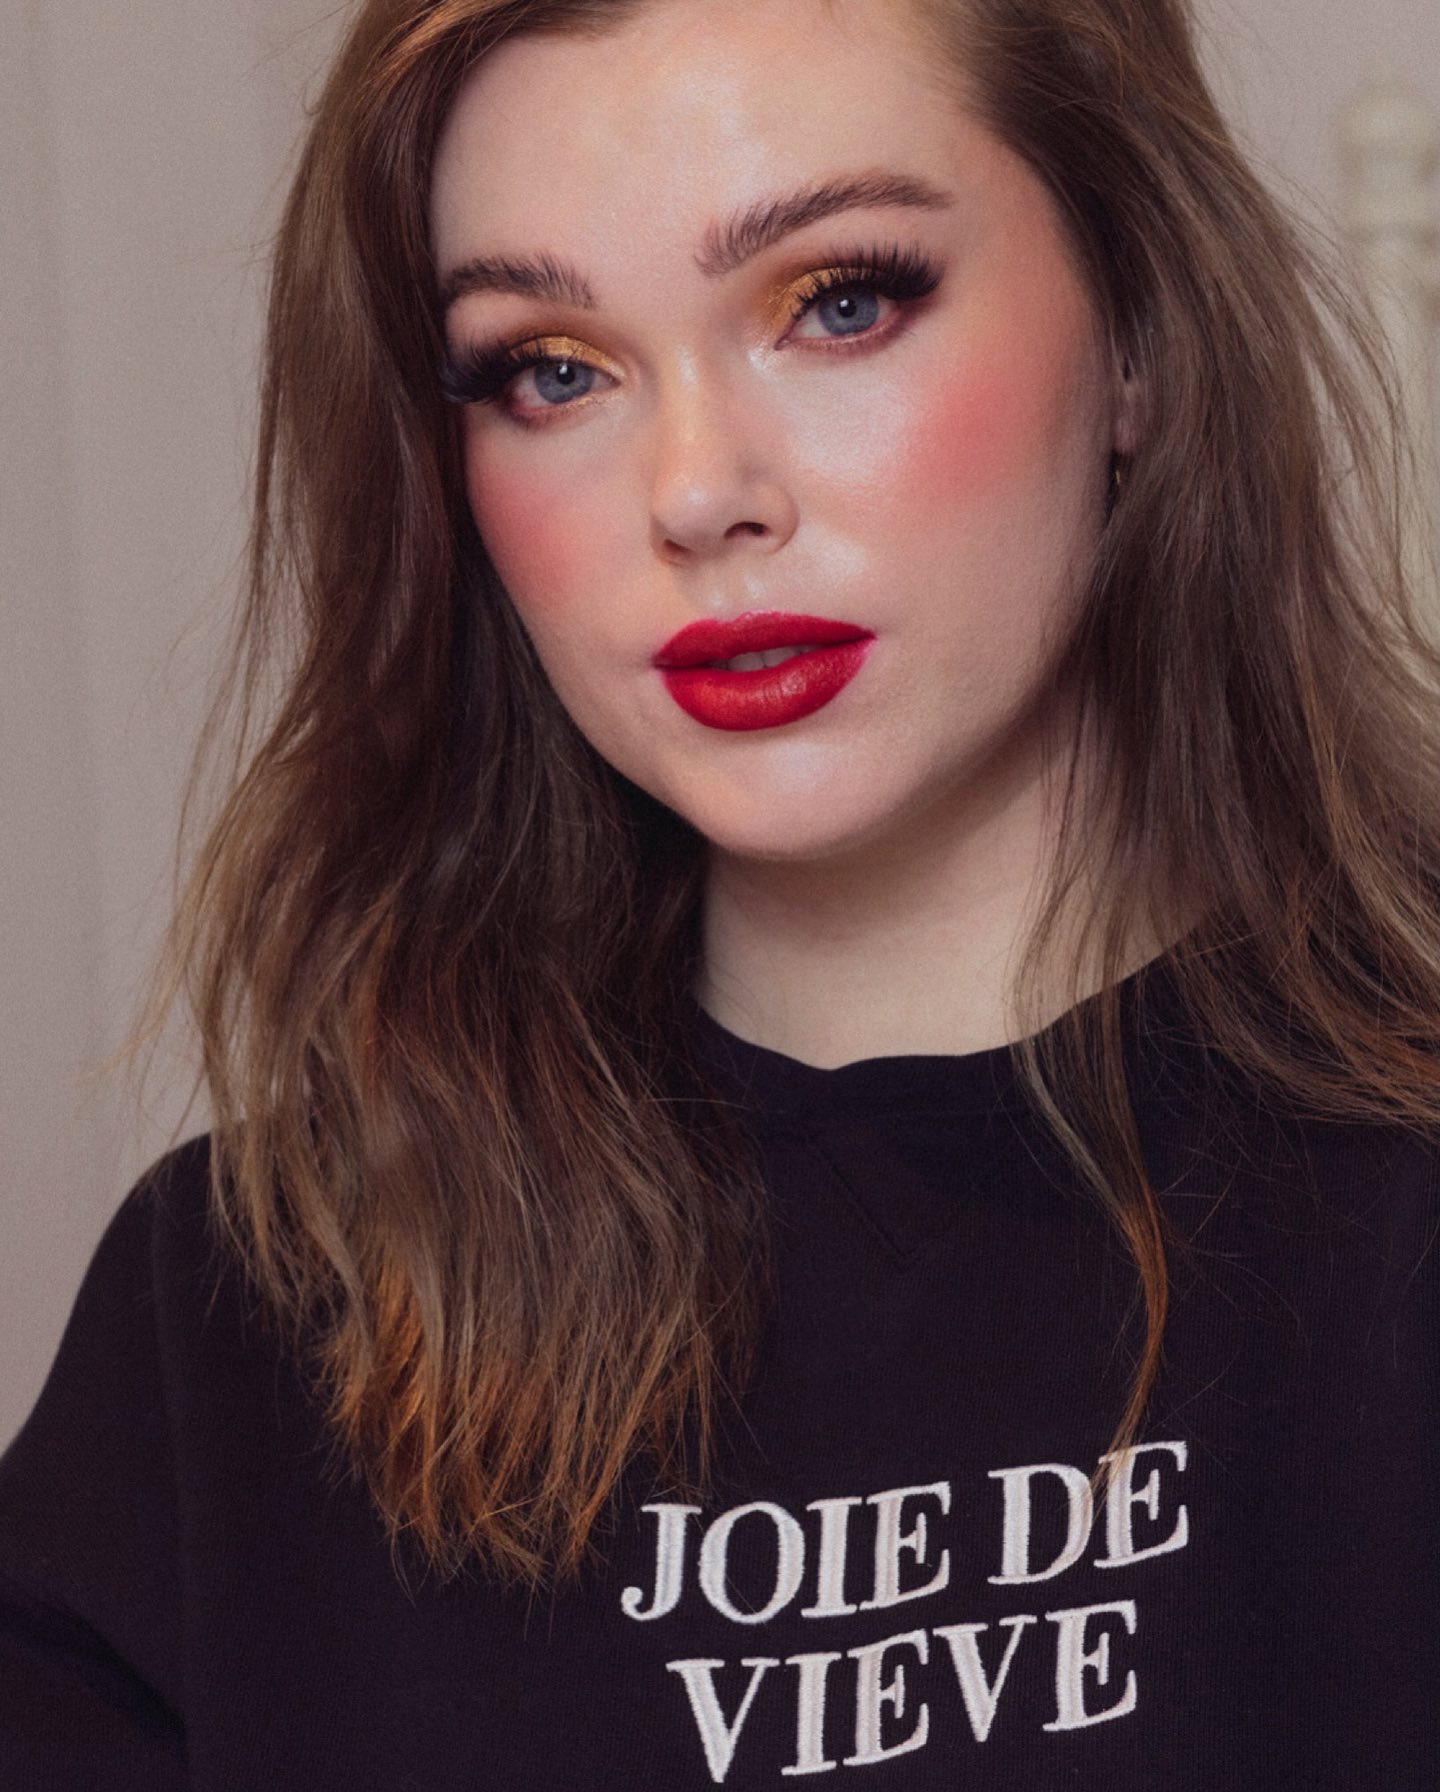 A full face of @vievemuse ✨

EYES:
- Eye Wand ‘Sand’
- The ‘Muse’ Palette
- Half Lash ‘HL2 Intense’

FACE:
- Modern Bronzer ‘Light’
- Sunset Blush ‘Sorbet’
- Skin Dew Liquid Highlighter

LIPS:
- Modern Matte Lipstick ‘Muse’
- Modern Matte Lip Definer ‘Muse’
- Lip Dew (very tiny amount)

JUMPERS:
The jumpers (yes, I bought both the black and the grey paha) are beaut and I can’t wait for them to be for sale online for you all to get your hands on.  I’ll keep checking for you and let you know as soon as they’re available ✨

Does anyone else still have the OG I’m Tired and Tired Girl Club t-shirts from yeaaaars ago?! 

#VIEVEmuse #VIEVE

🏷🏷
#liketkit #LTKHoliday #LTKbeauty #LTKSeasonal @shop.ltk @ltk.europe